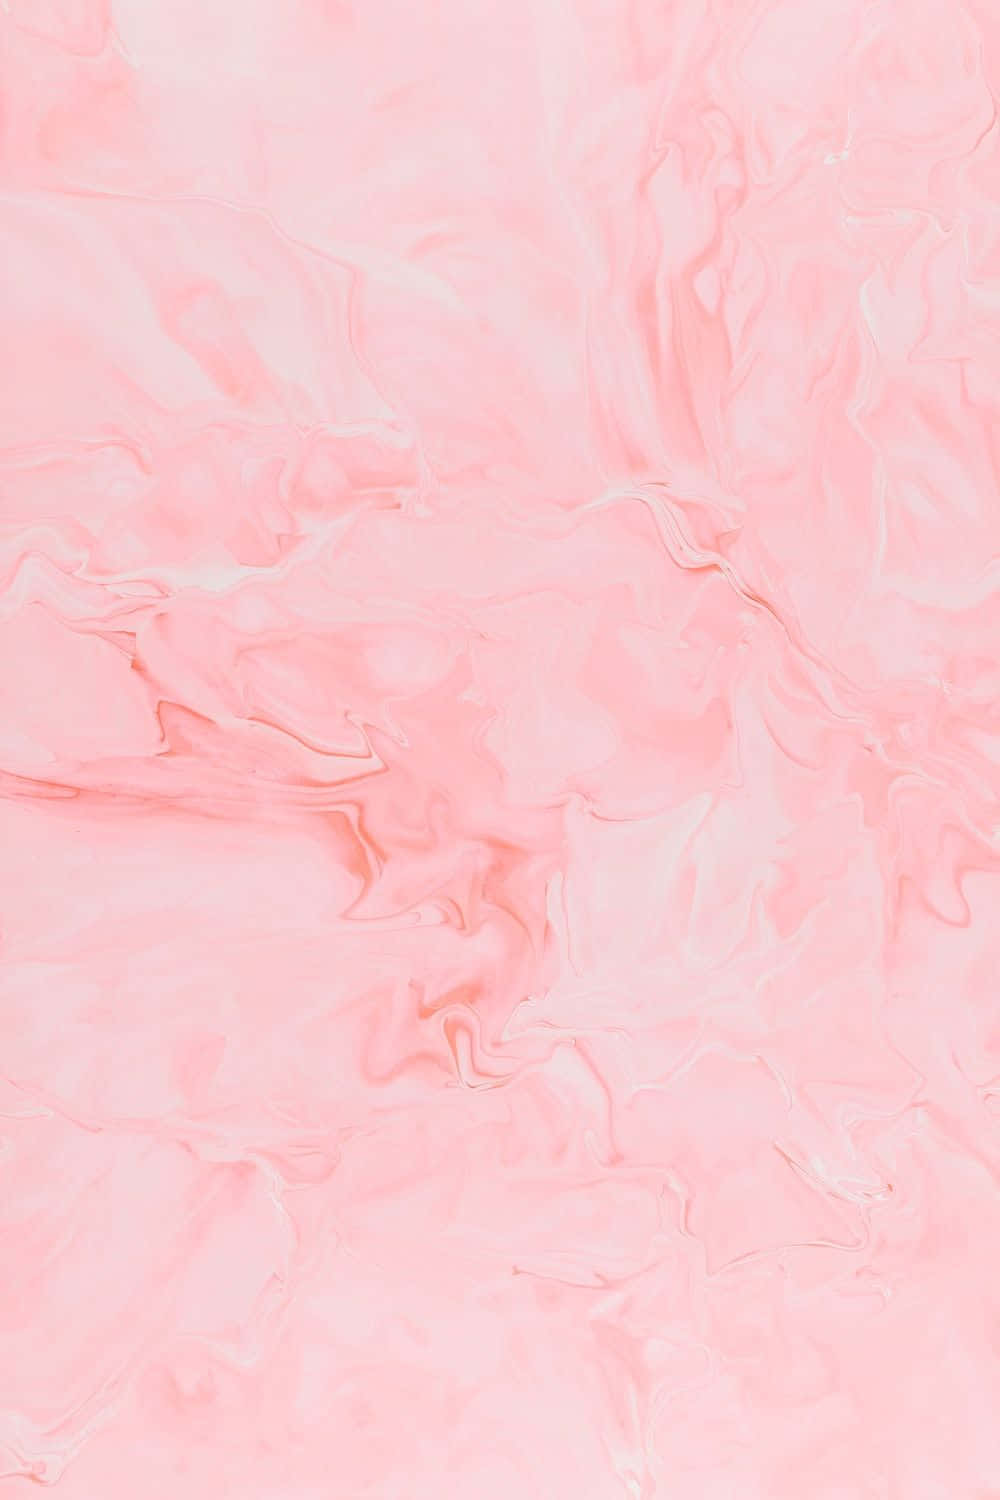 Warm and dreamy white and pink background